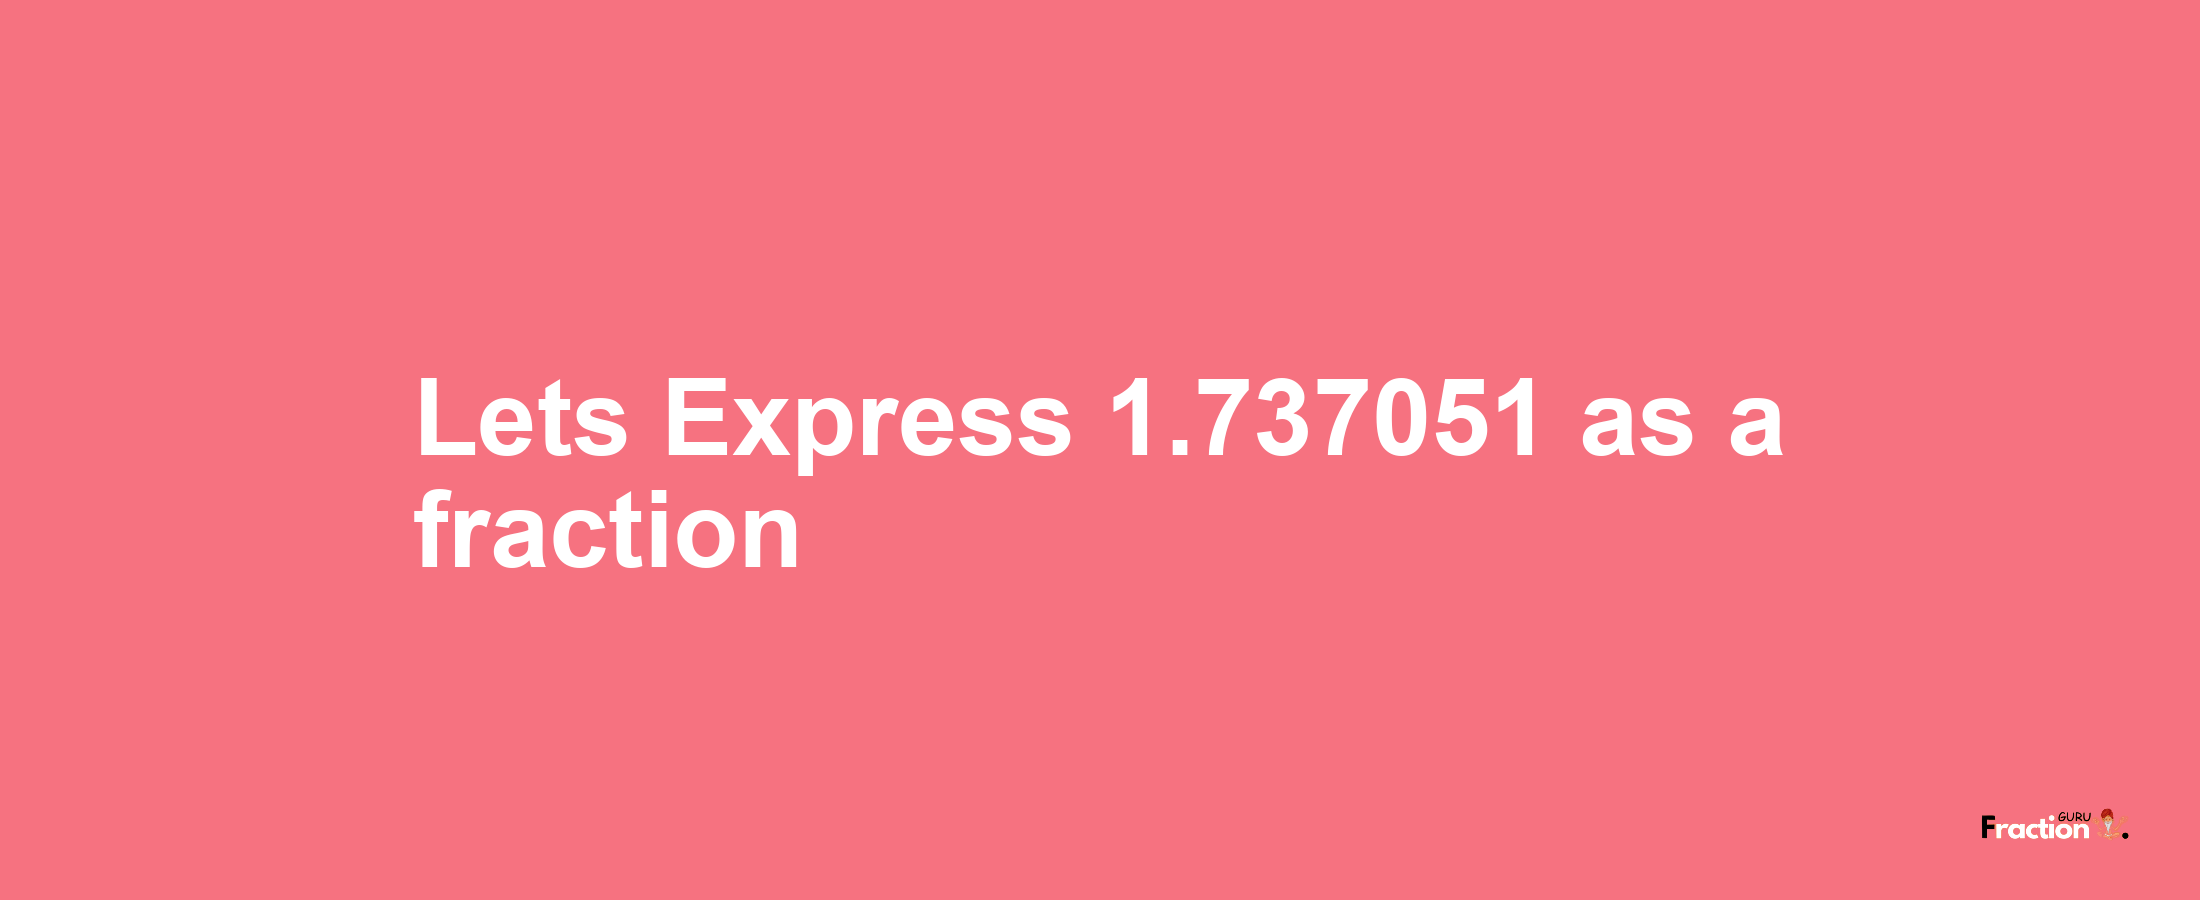 Lets Express 1.737051 as afraction